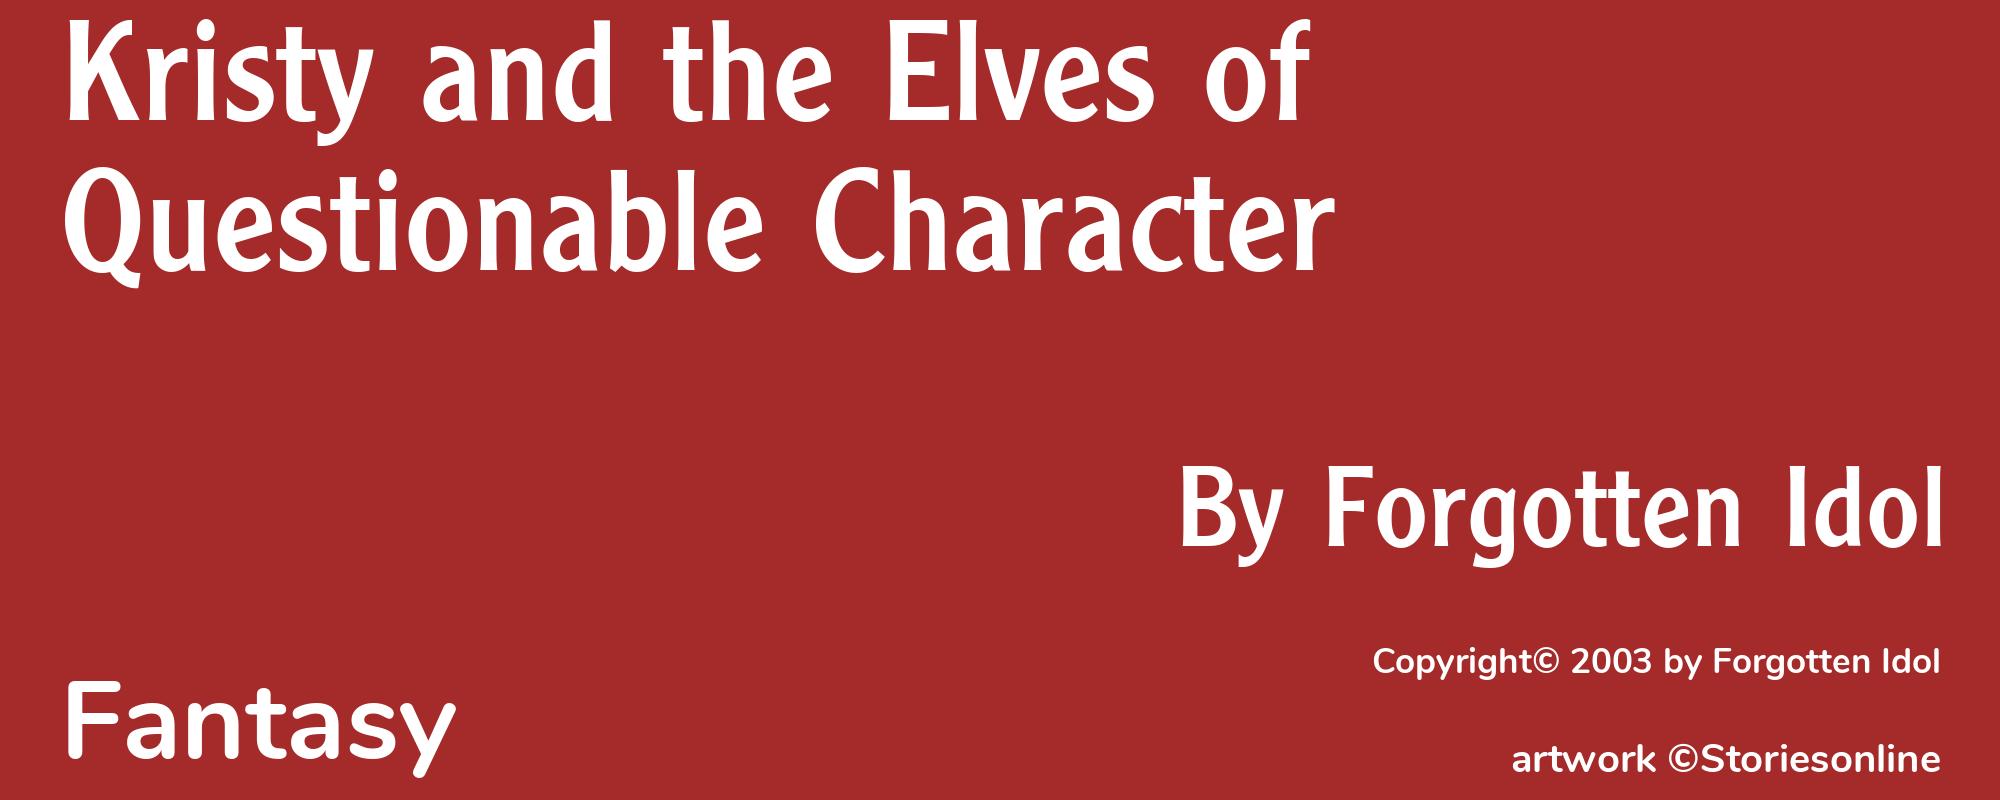 Kristy and the Elves of Questionable Character - Cover